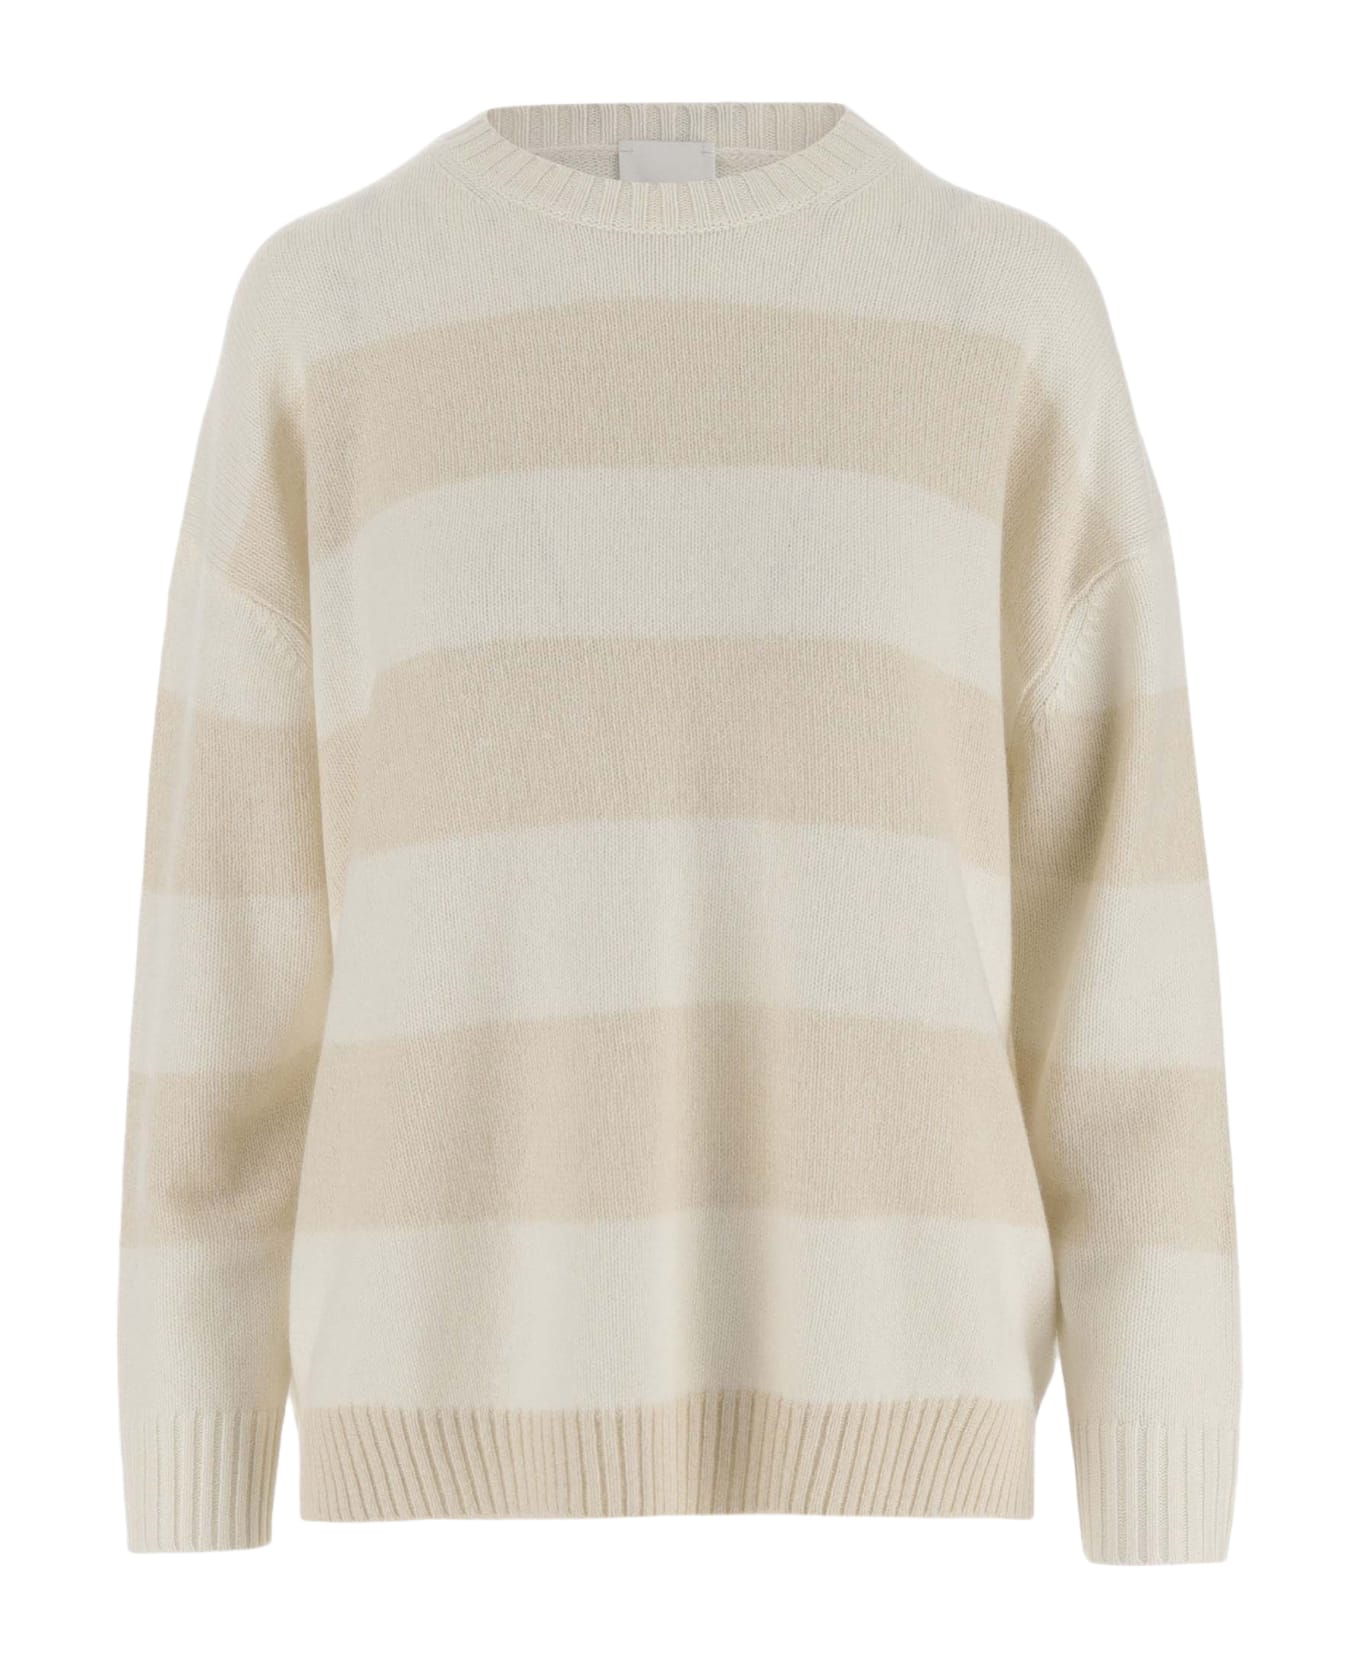 Allude Wool And Cashmere Blend Striped Sweater - Red